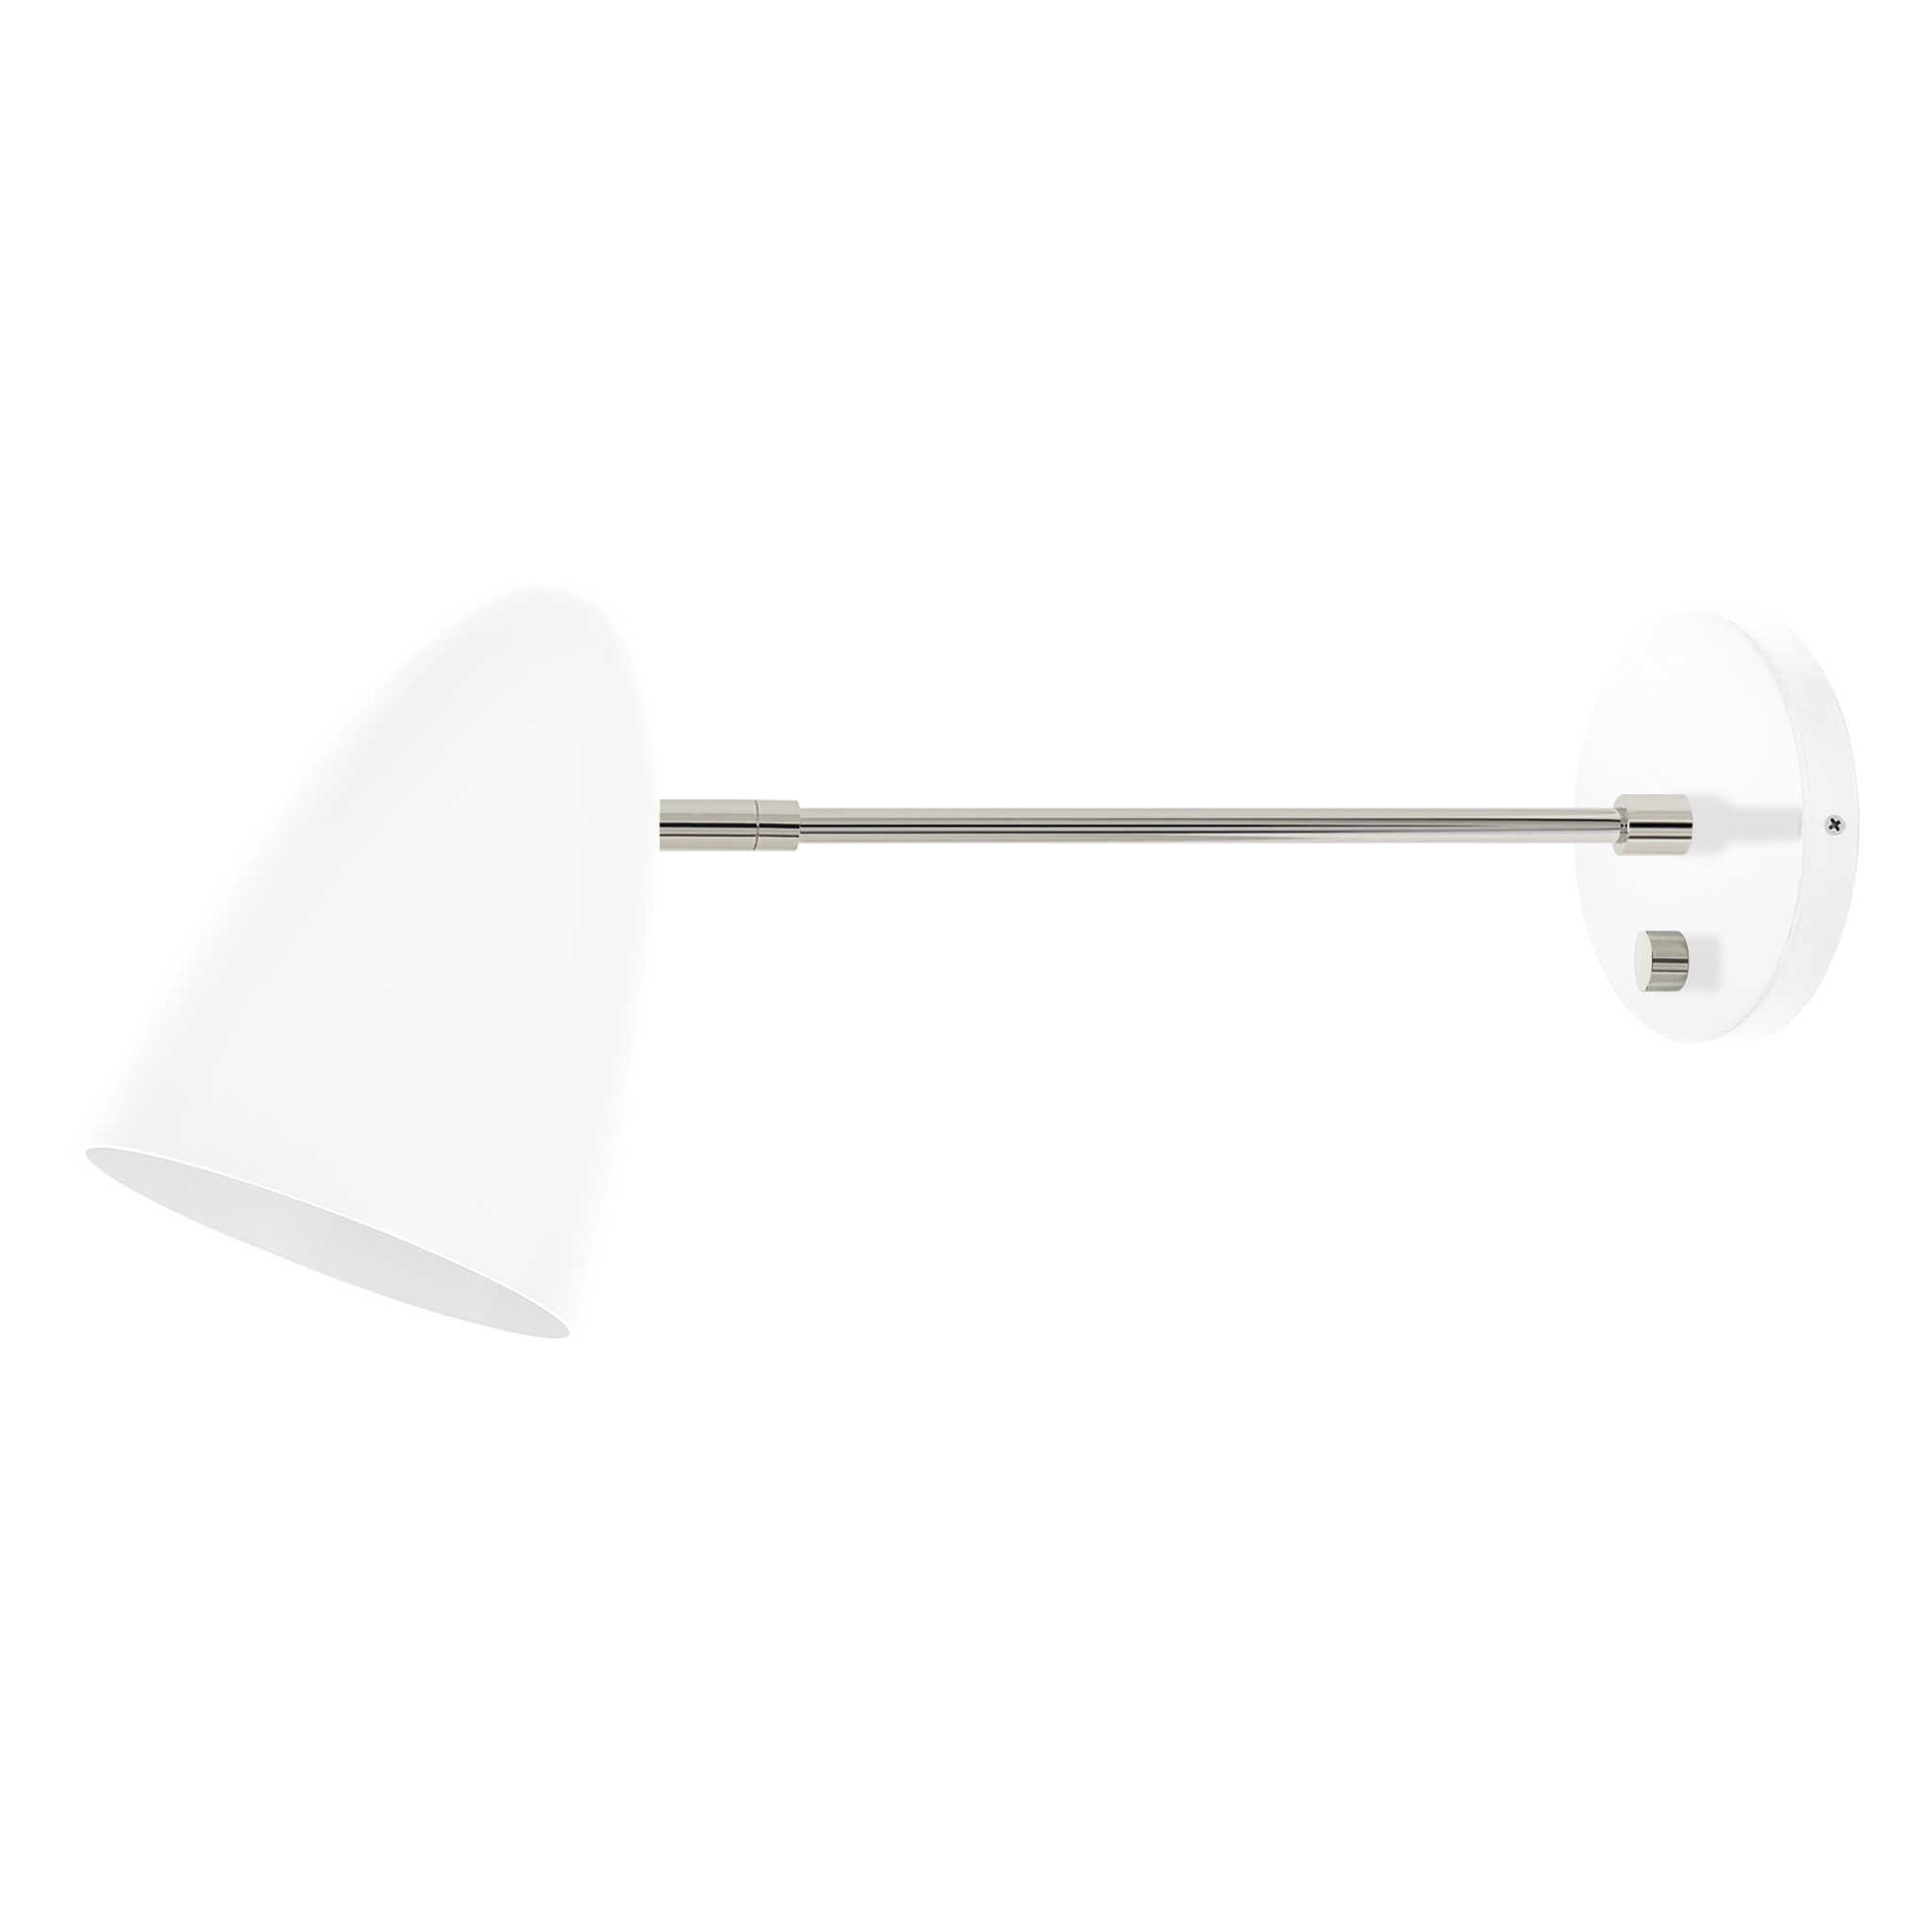 Nickel and white color Boom sconce 10" arm Dutton Brown lighting